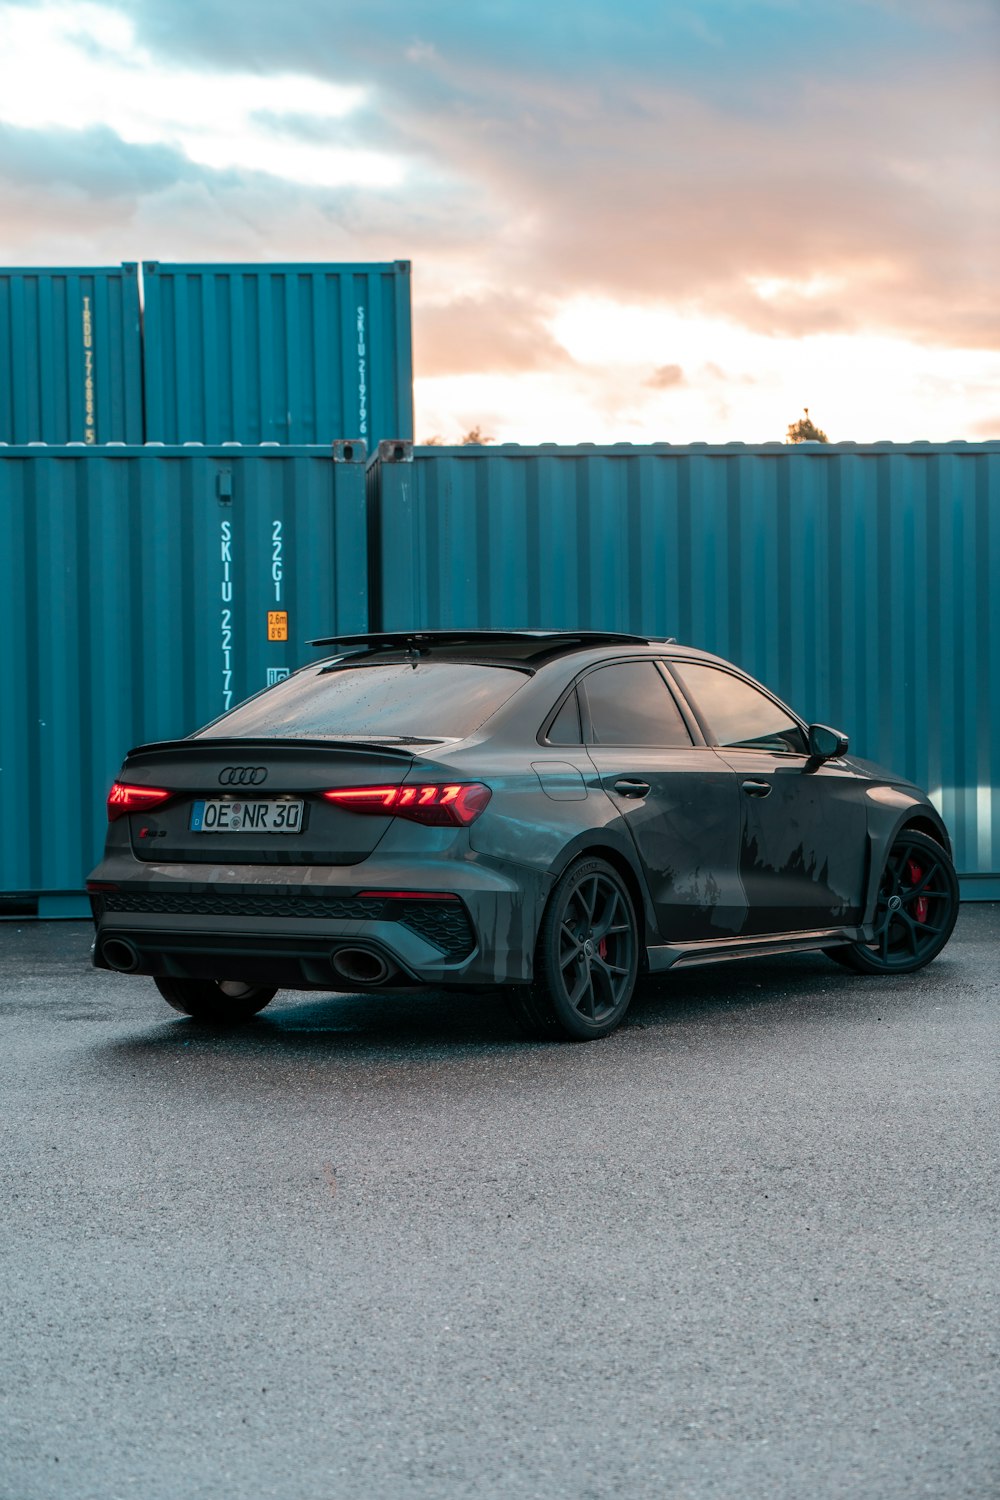 a grey car parked in front of a blue container